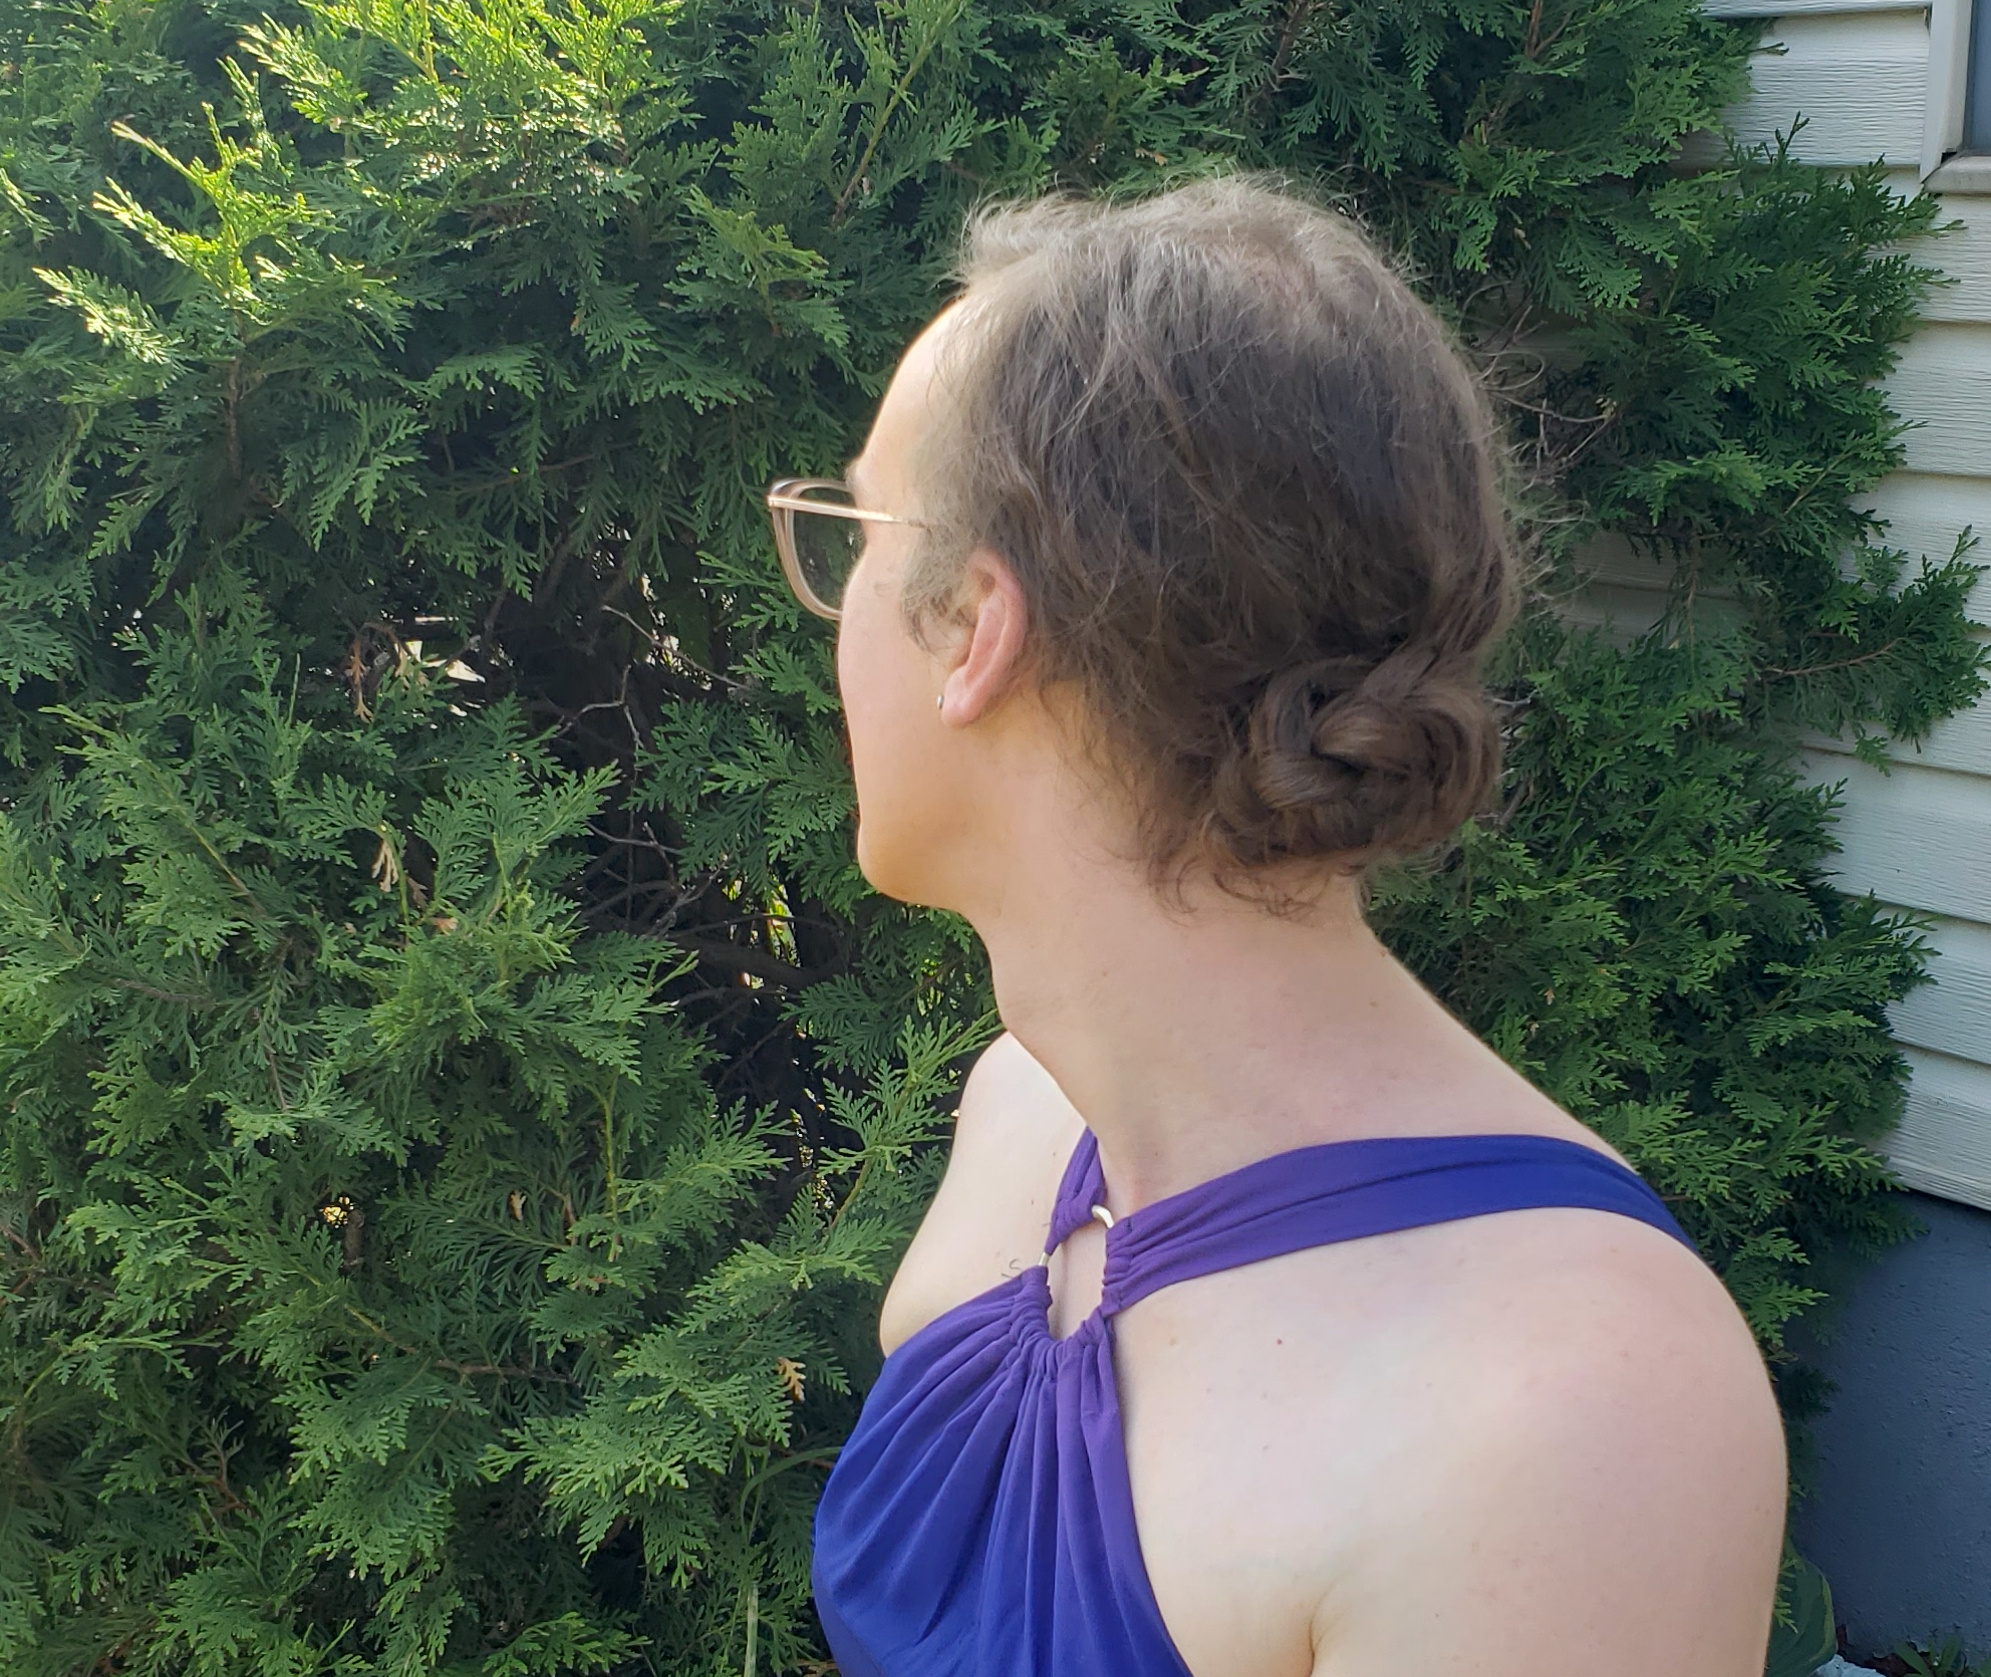 The back of my head, showing a braided bun at the nape of my neck. I'm wearing the halterneck dress as described earlier in this post.